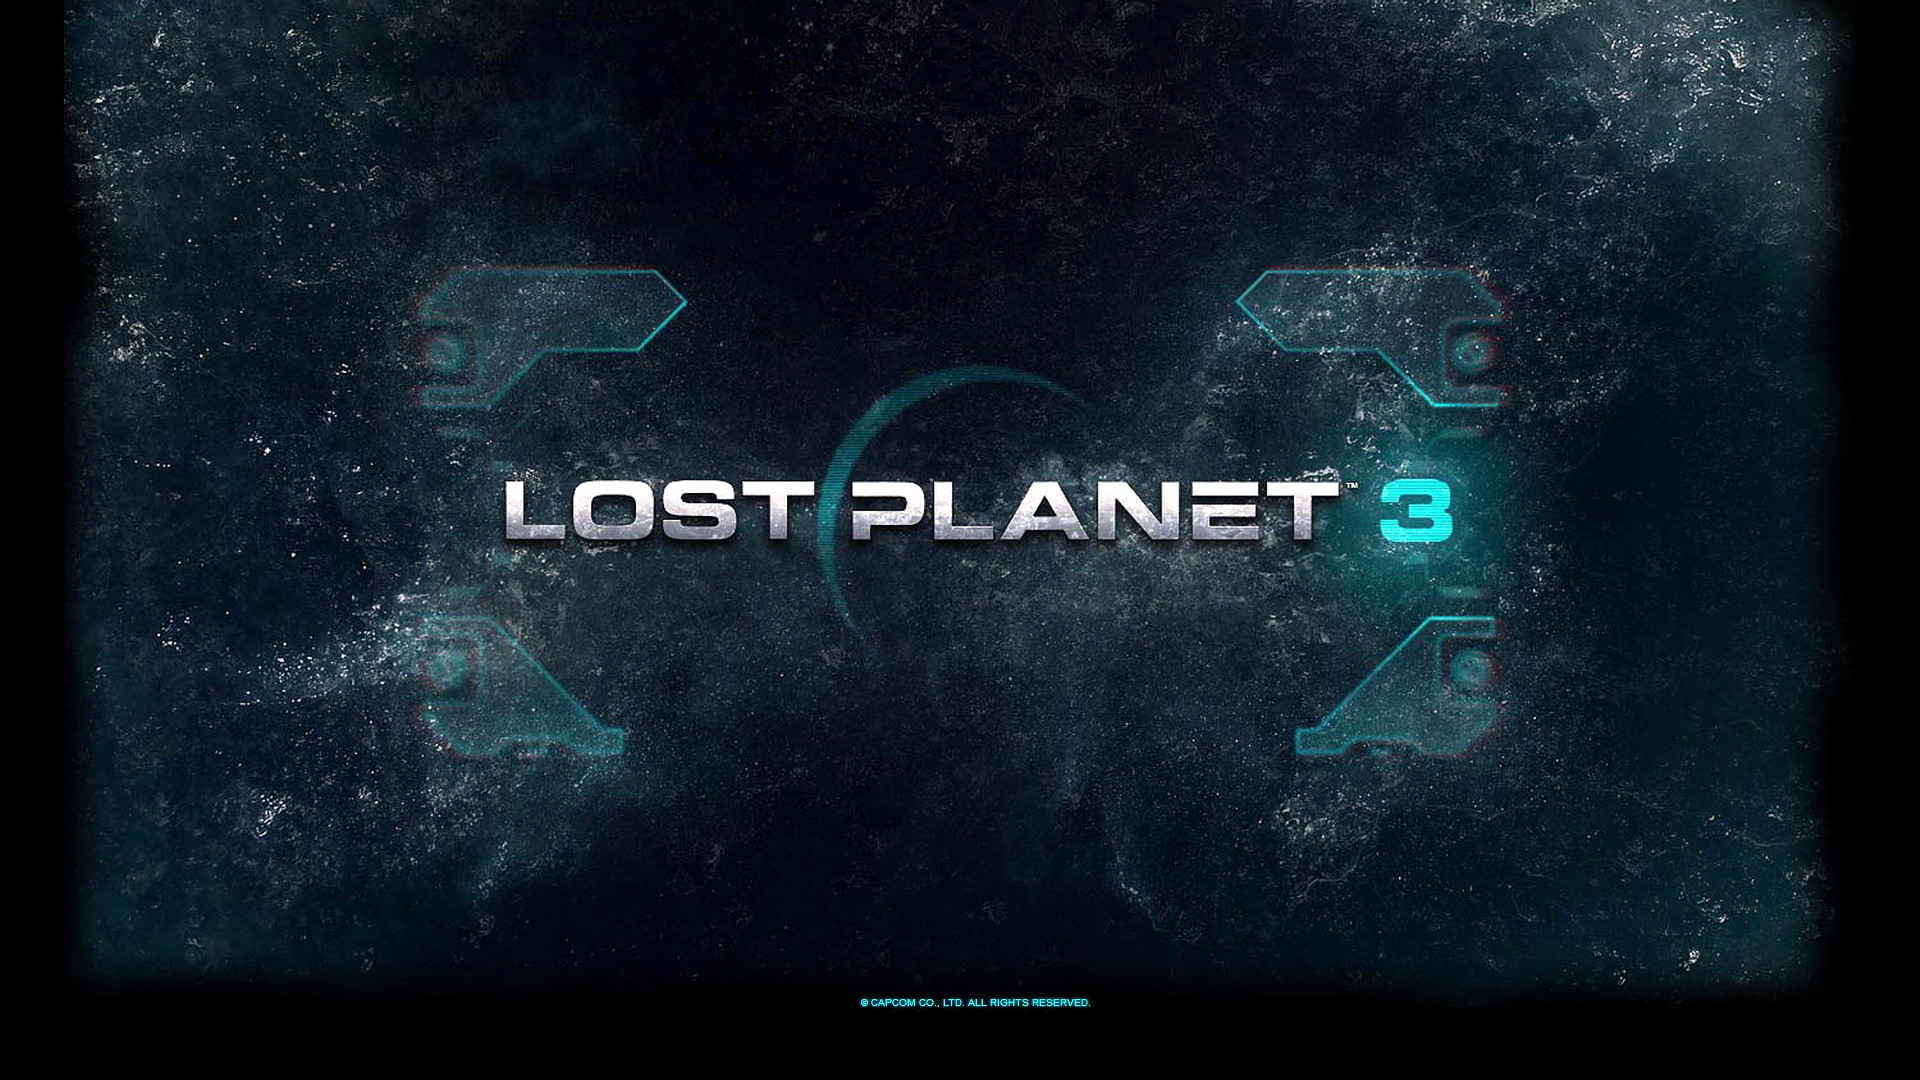 Tags Game Lost Planet 1920x1080